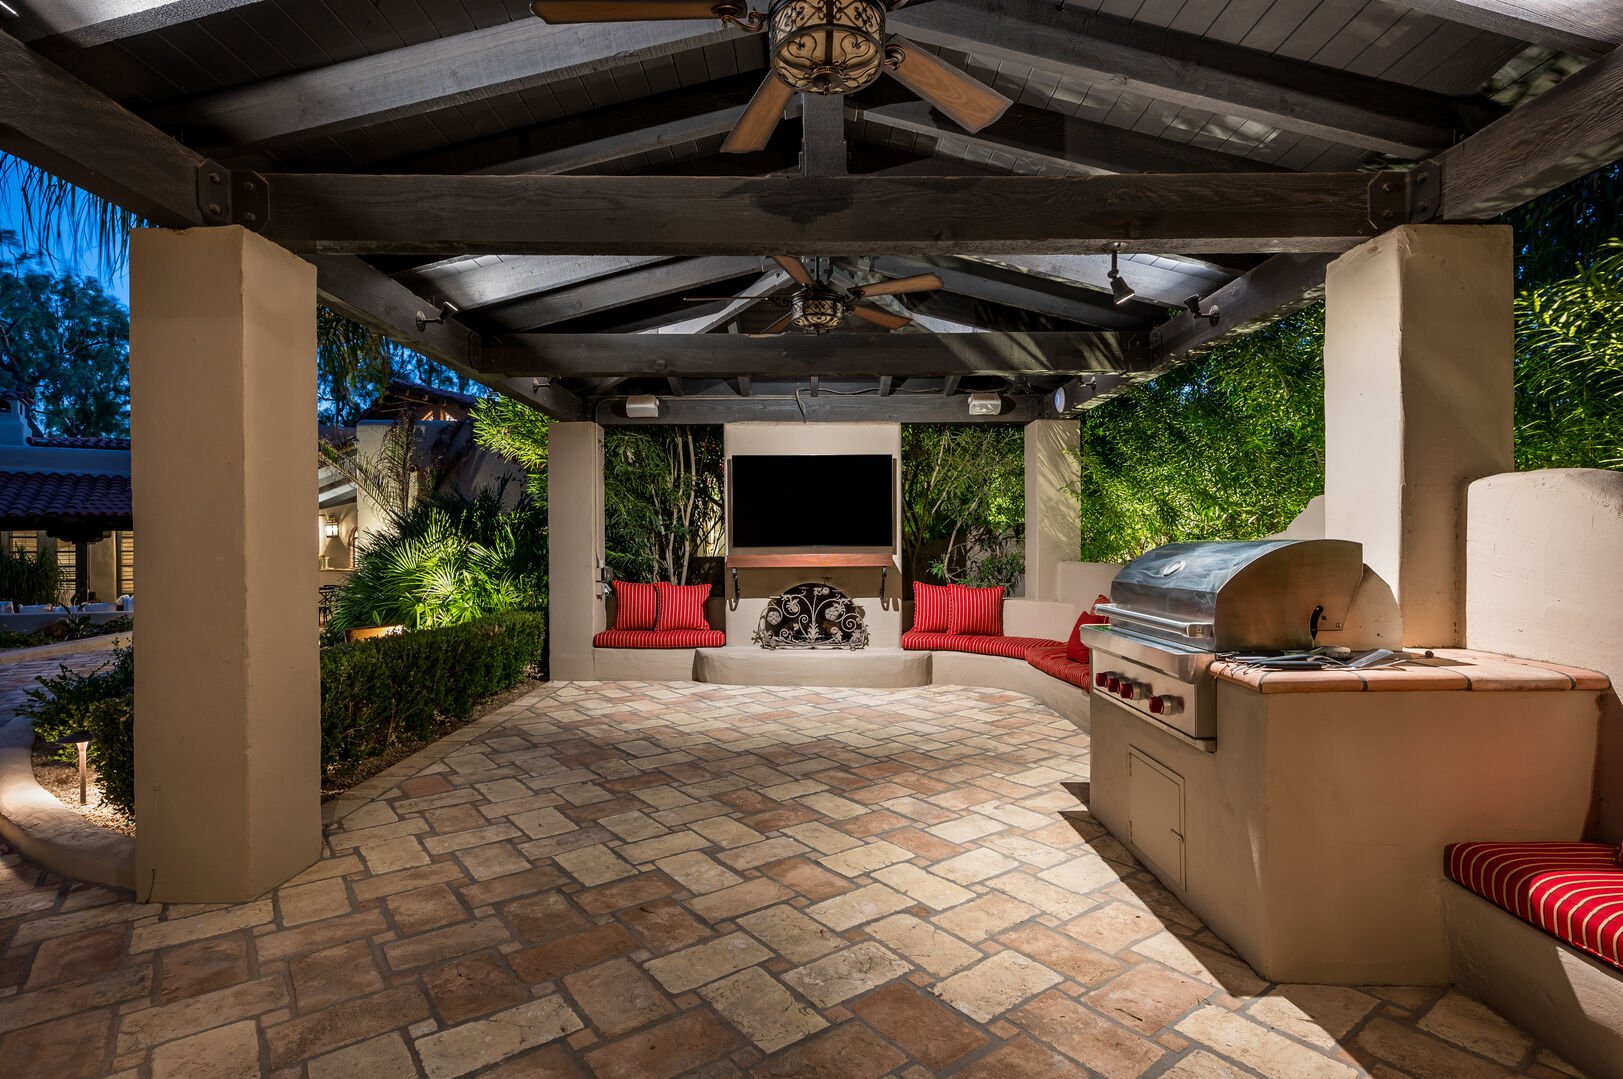 BBQ space by the casita